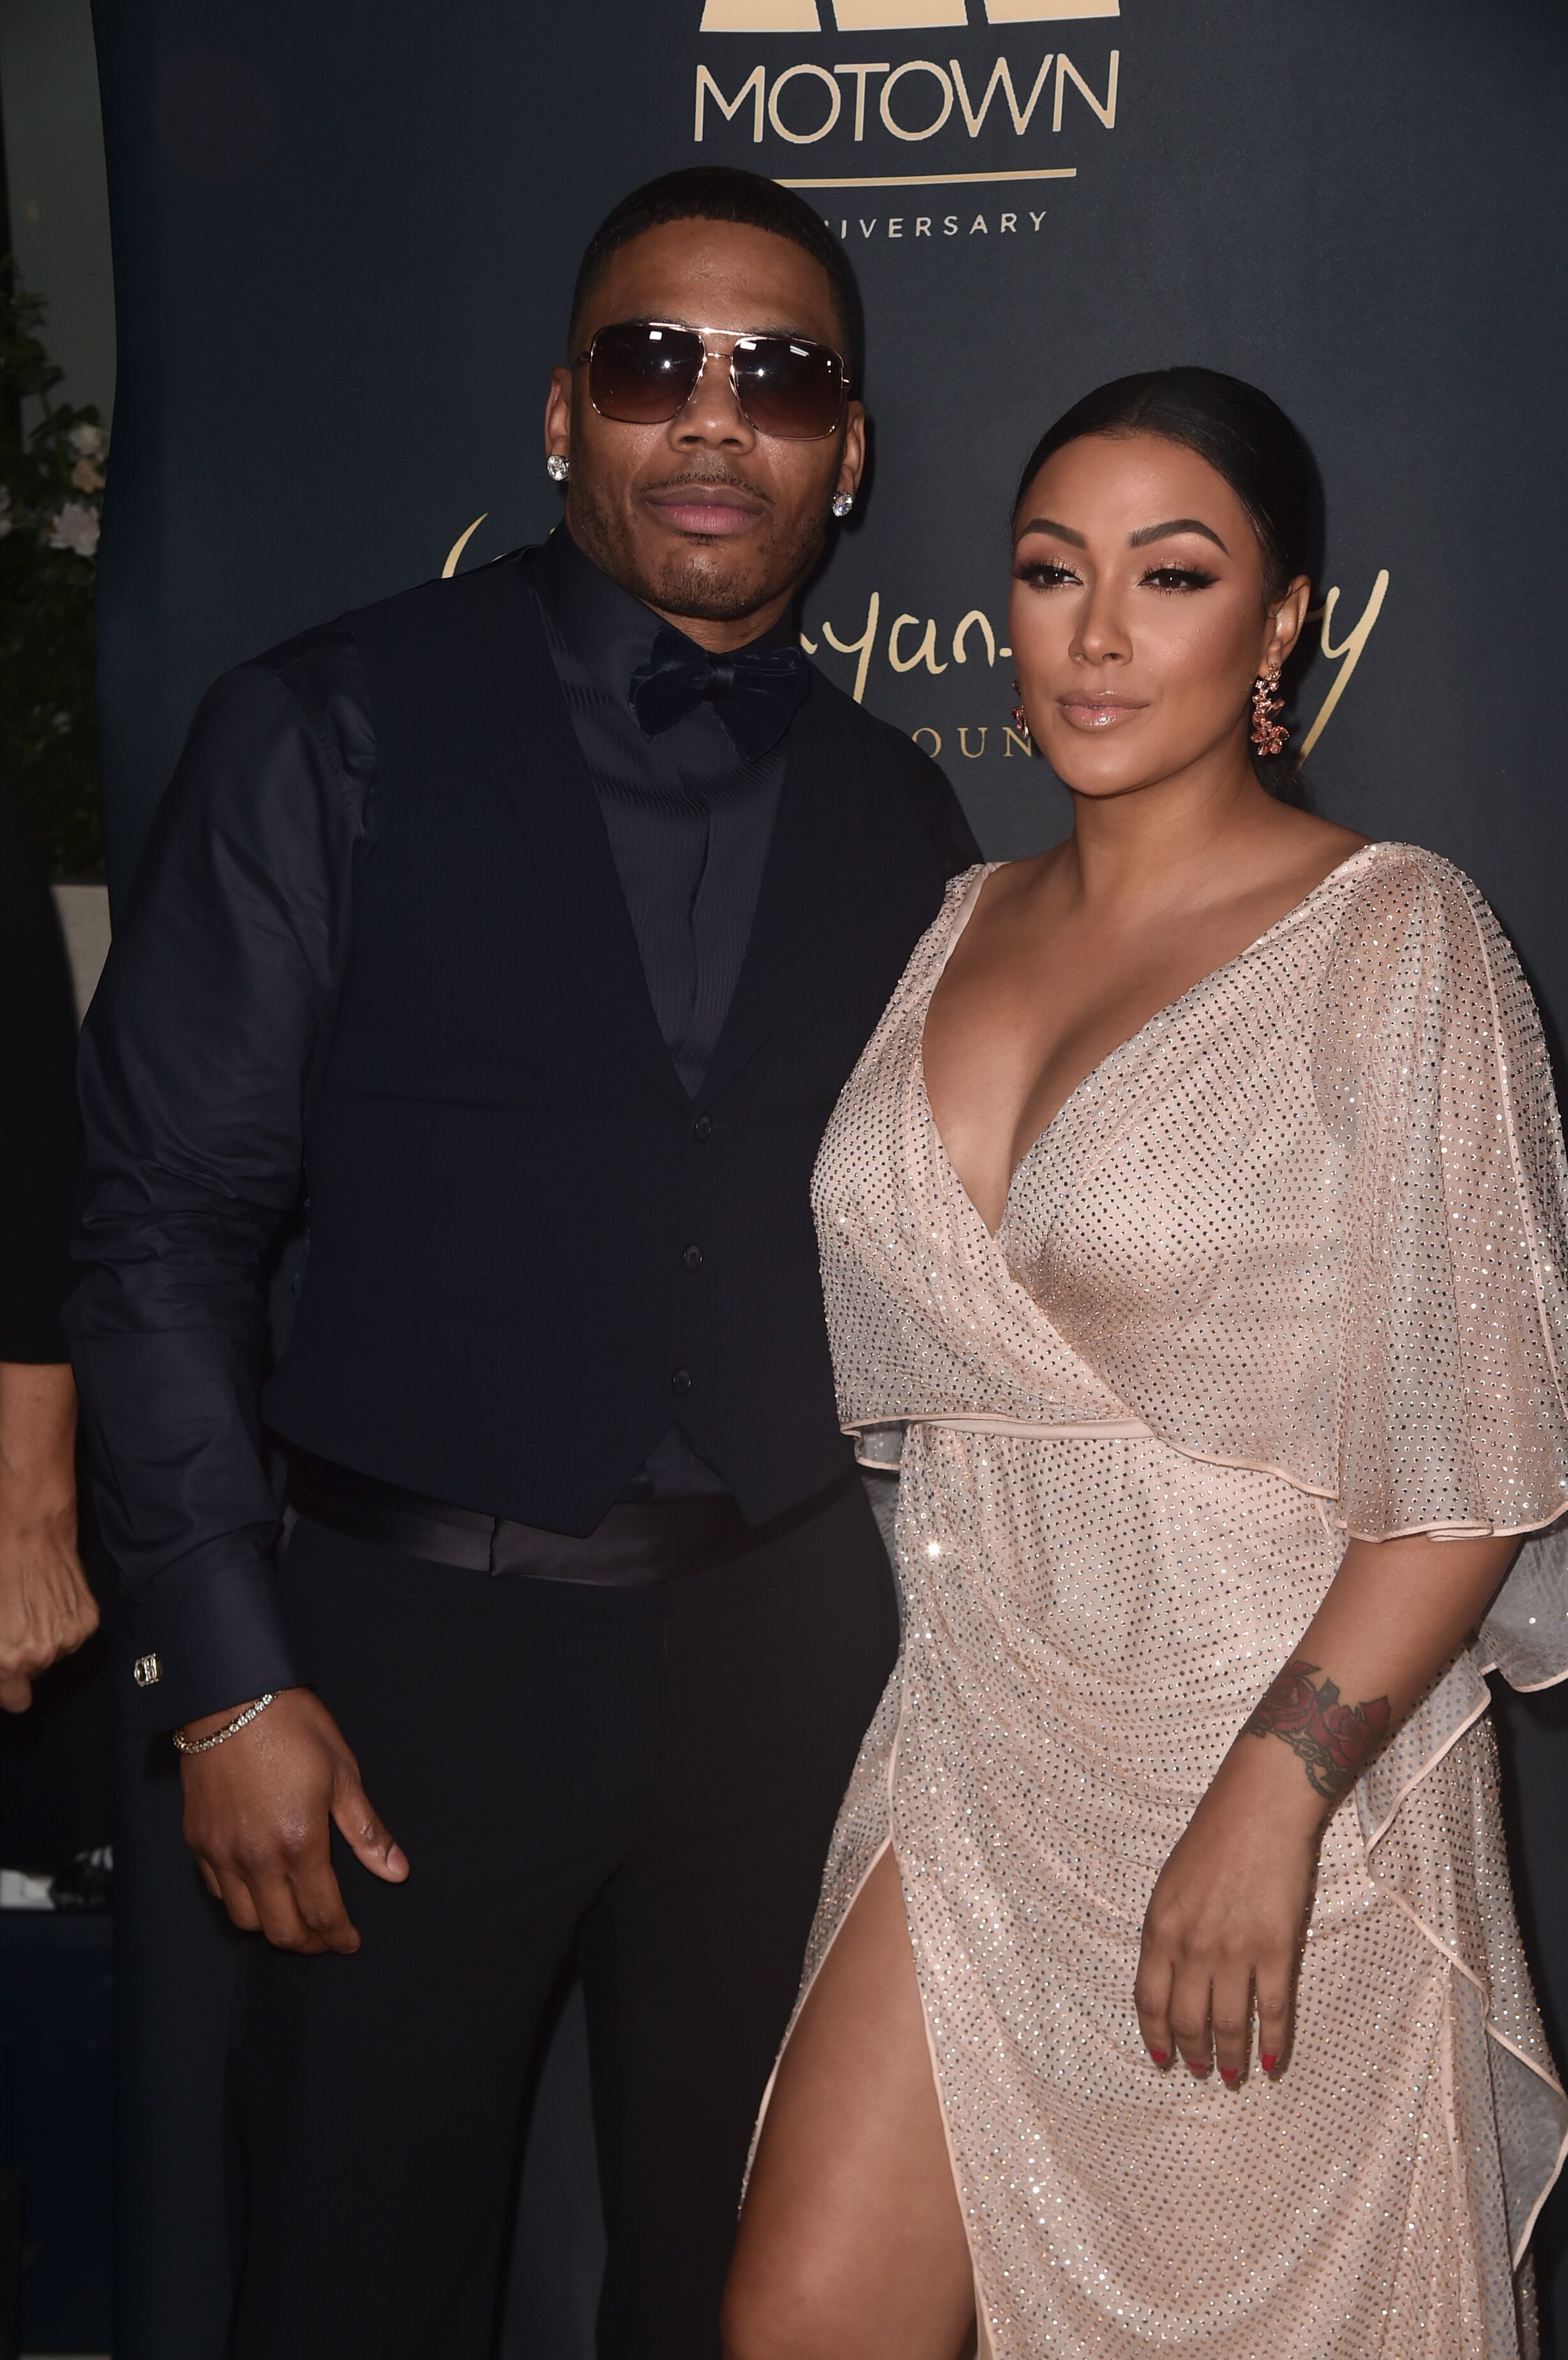 Nelly and Shantel Jackson at The Ryan Gordy Foundation Celebrates 60 Years Of Mowtown in Beverly Hills in November 2019 | Source: Getty Images 